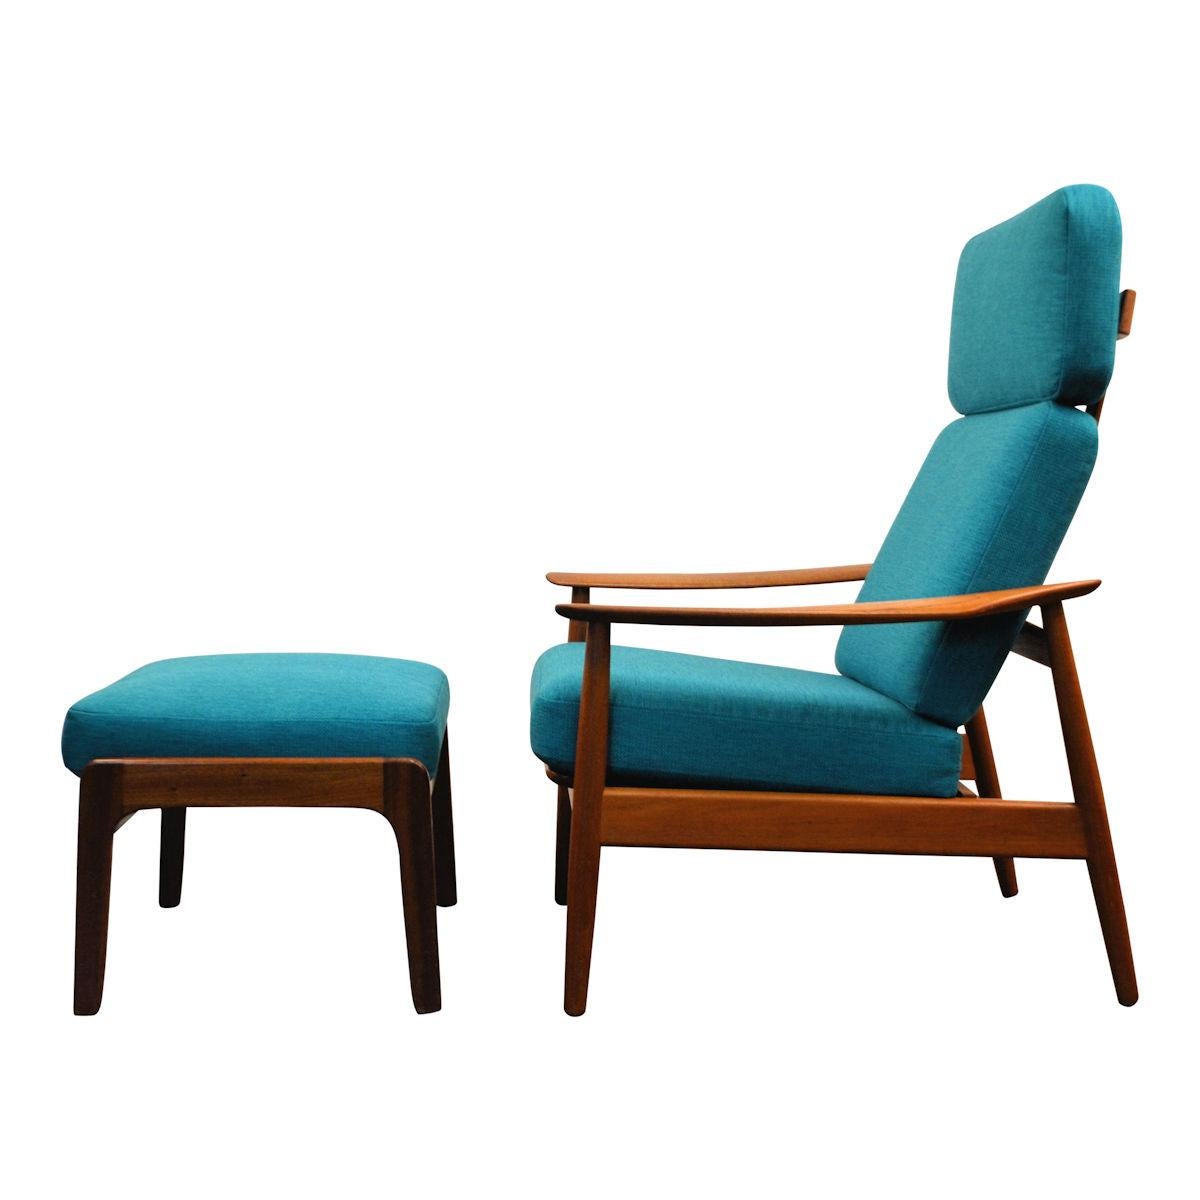 Mid-20th Century Vintage Arne Vodder Fd-164 Teak Lounge Chair and Ottoman For Sale